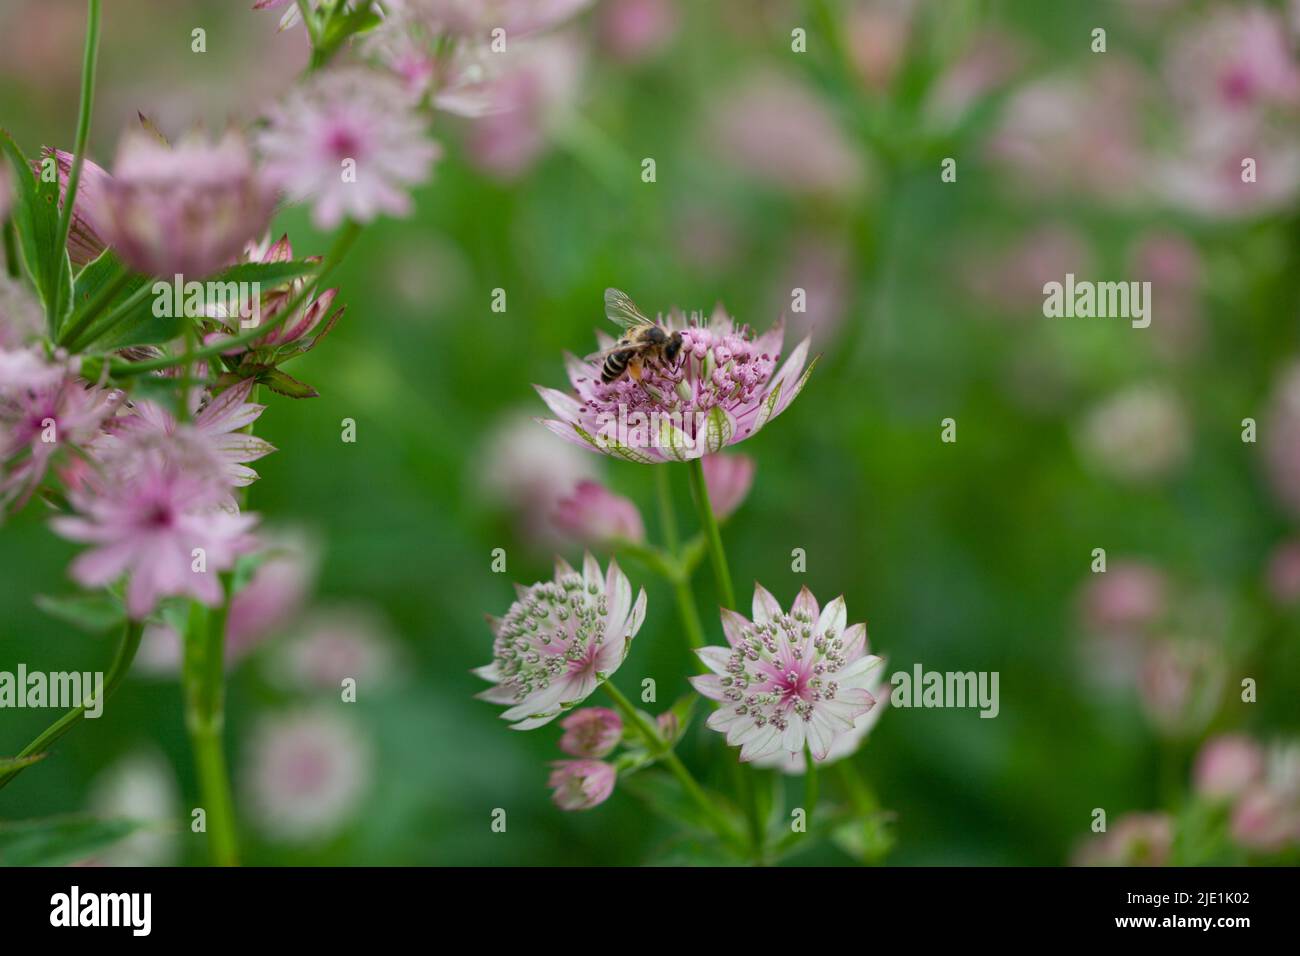 Close-up of a honeybee foraging on Greater Masterwort plant Stock Photo